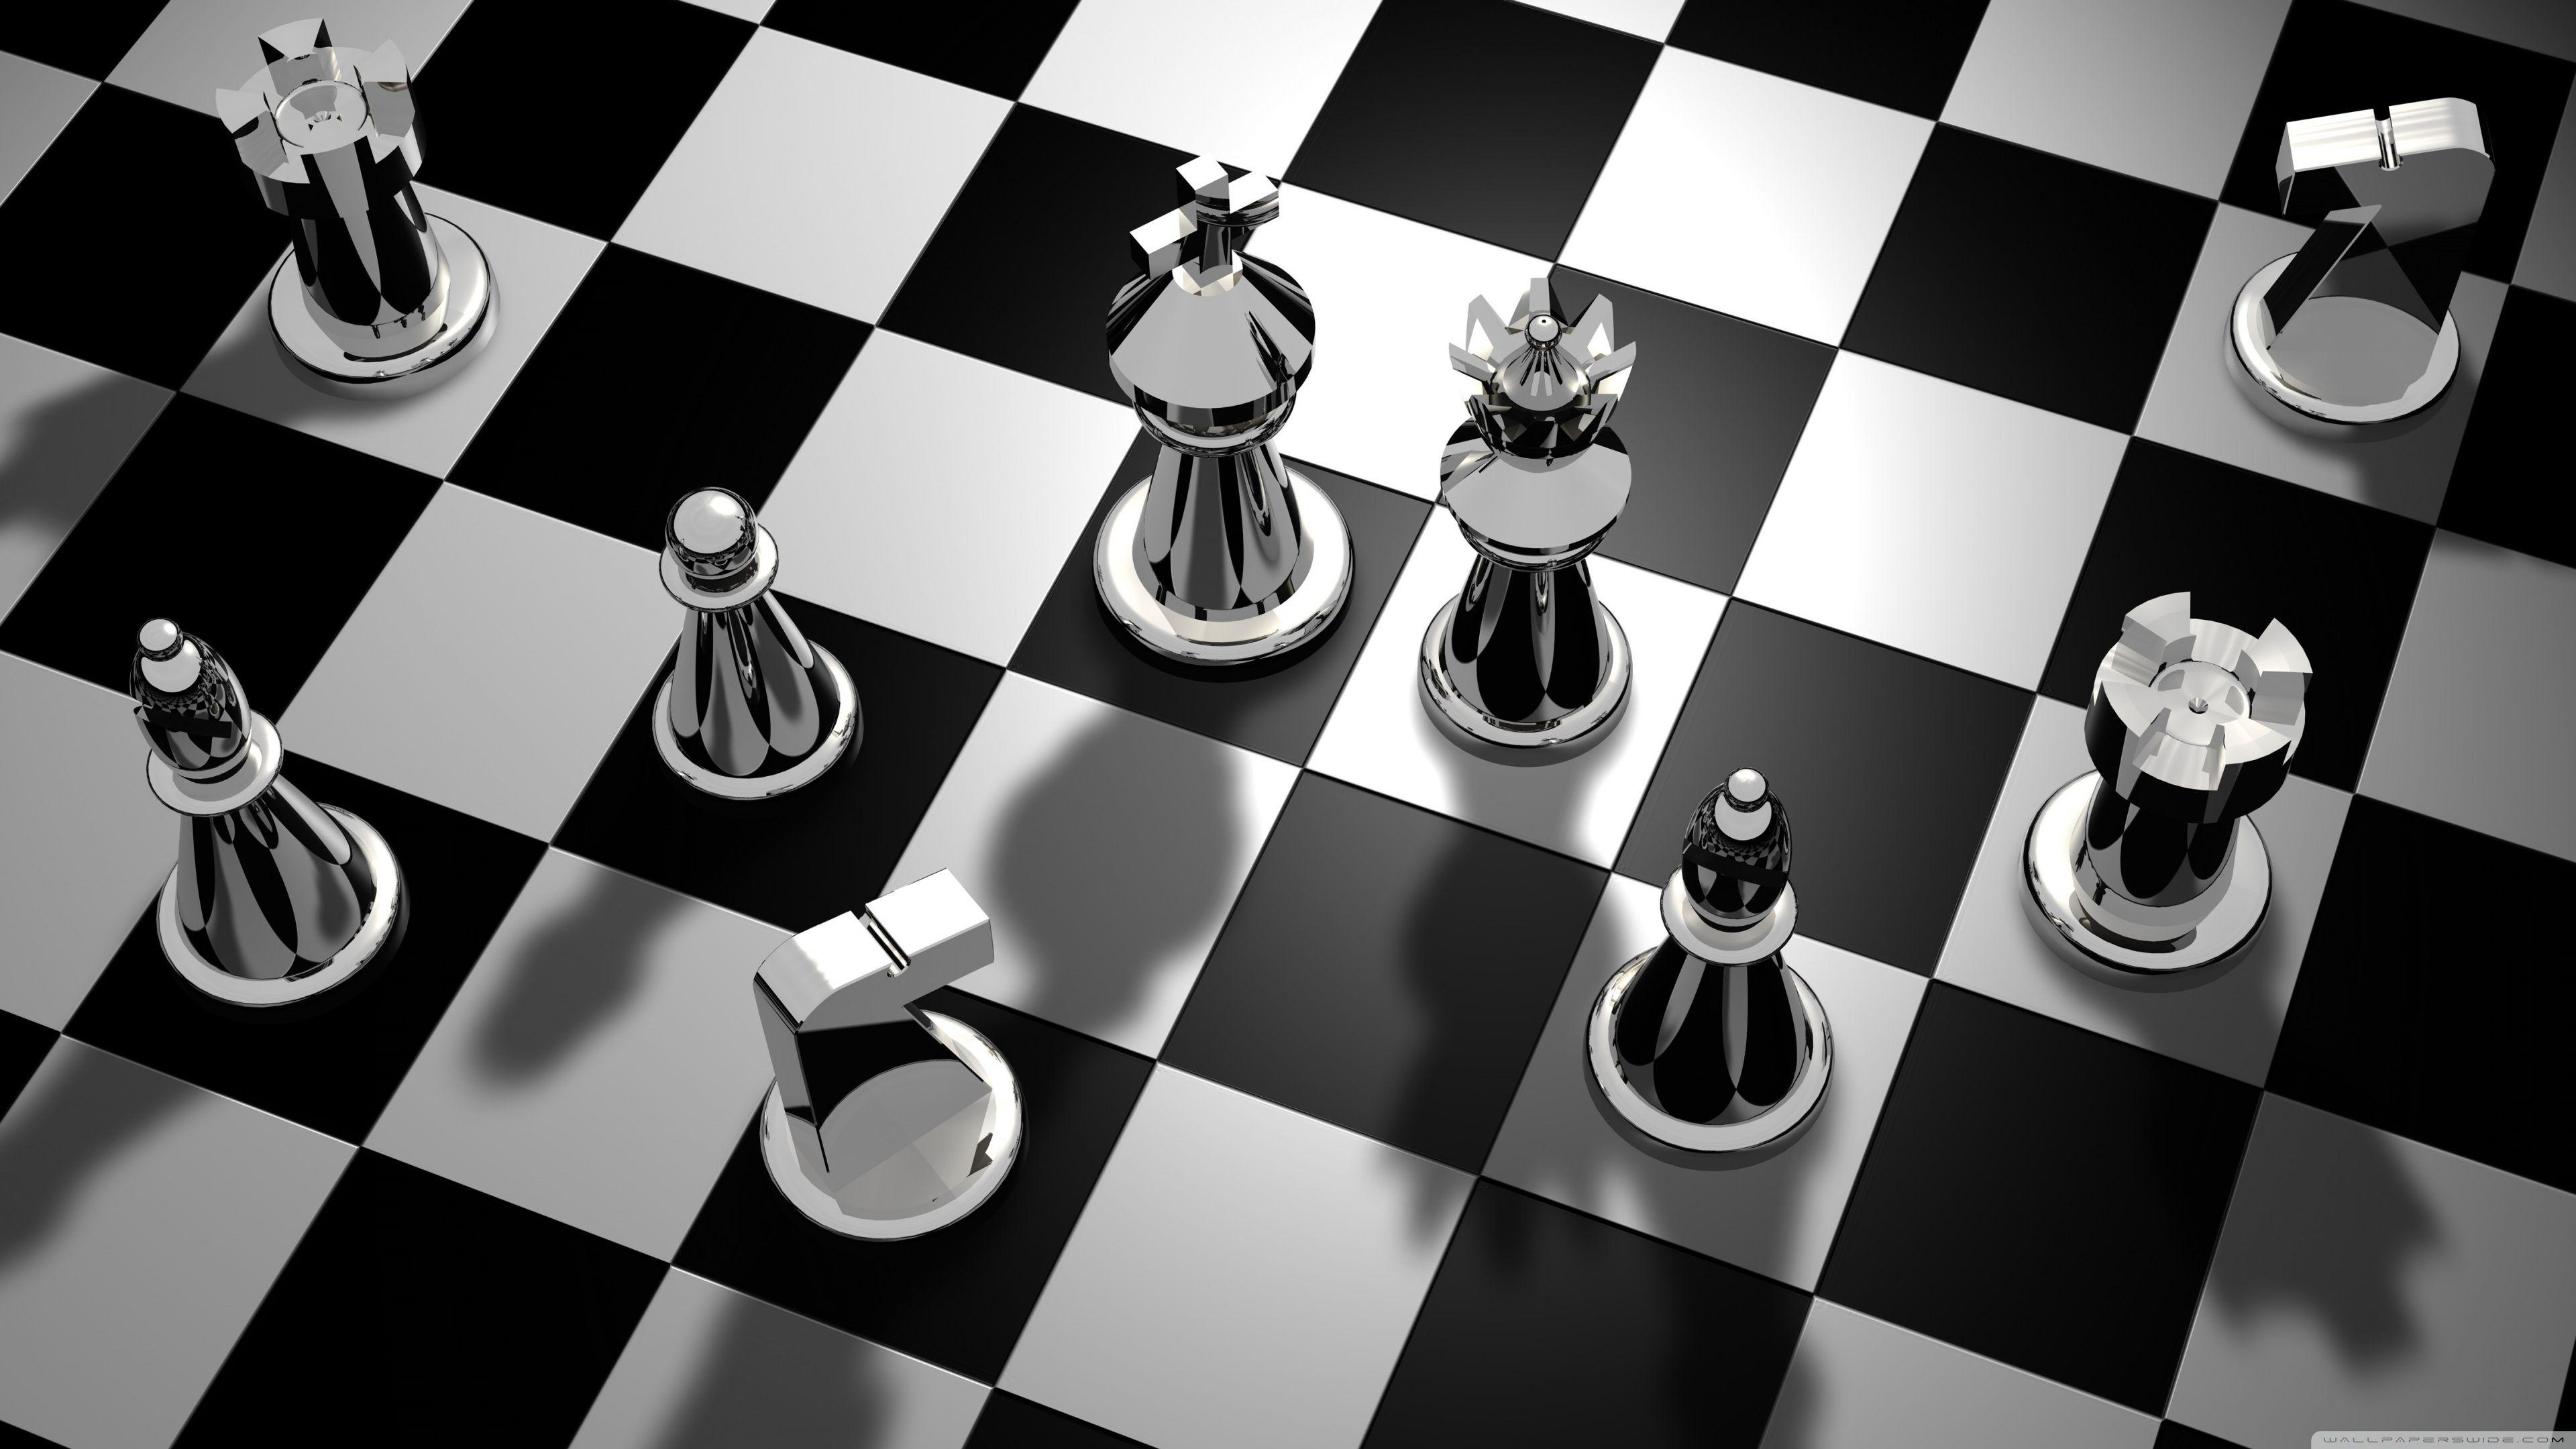 Download Chess Game HD Wallpaper